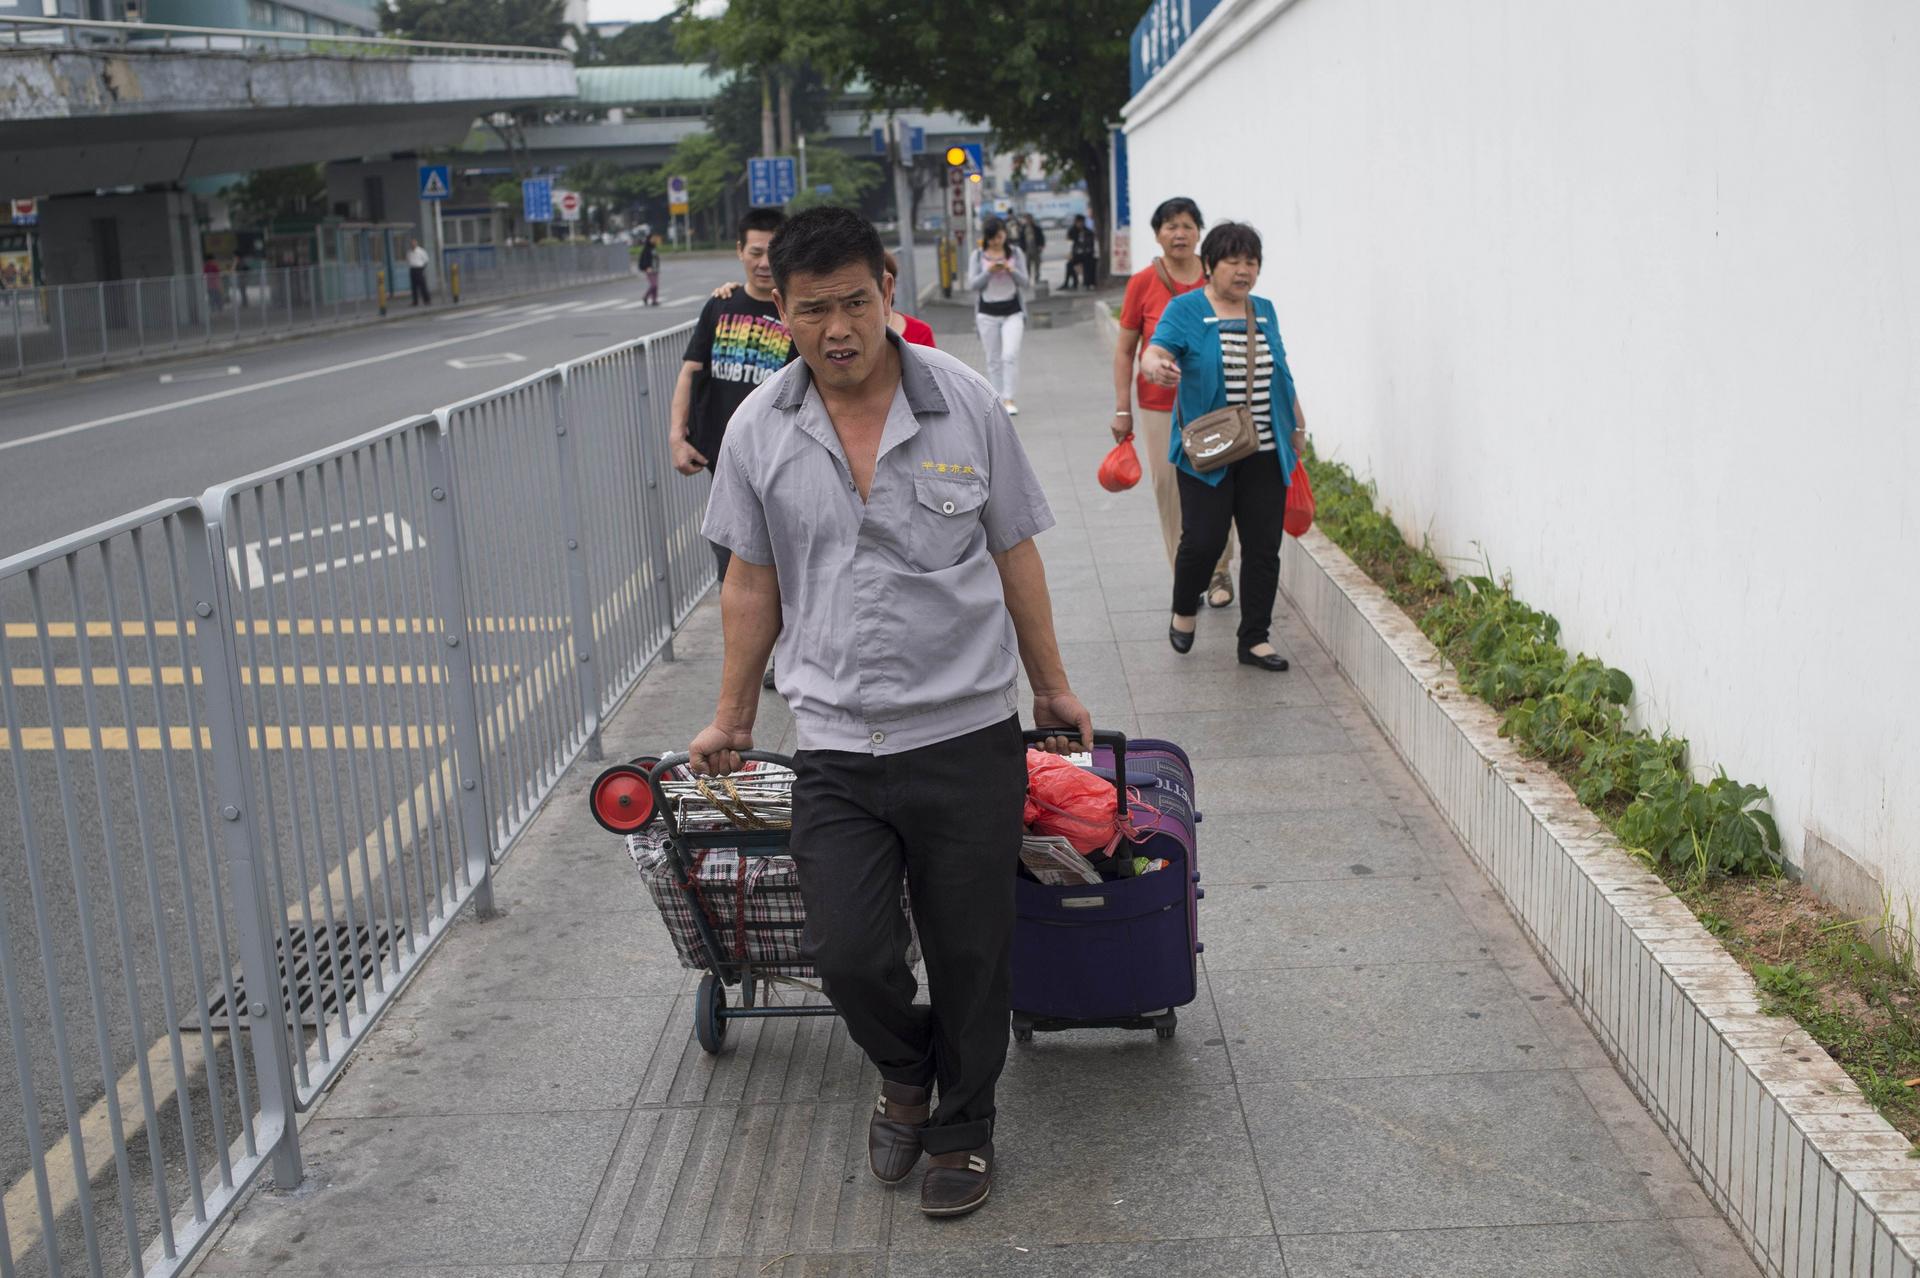 People in Shenzhen use the Lo Wu station connecting Hong Kong. Photo: AFP